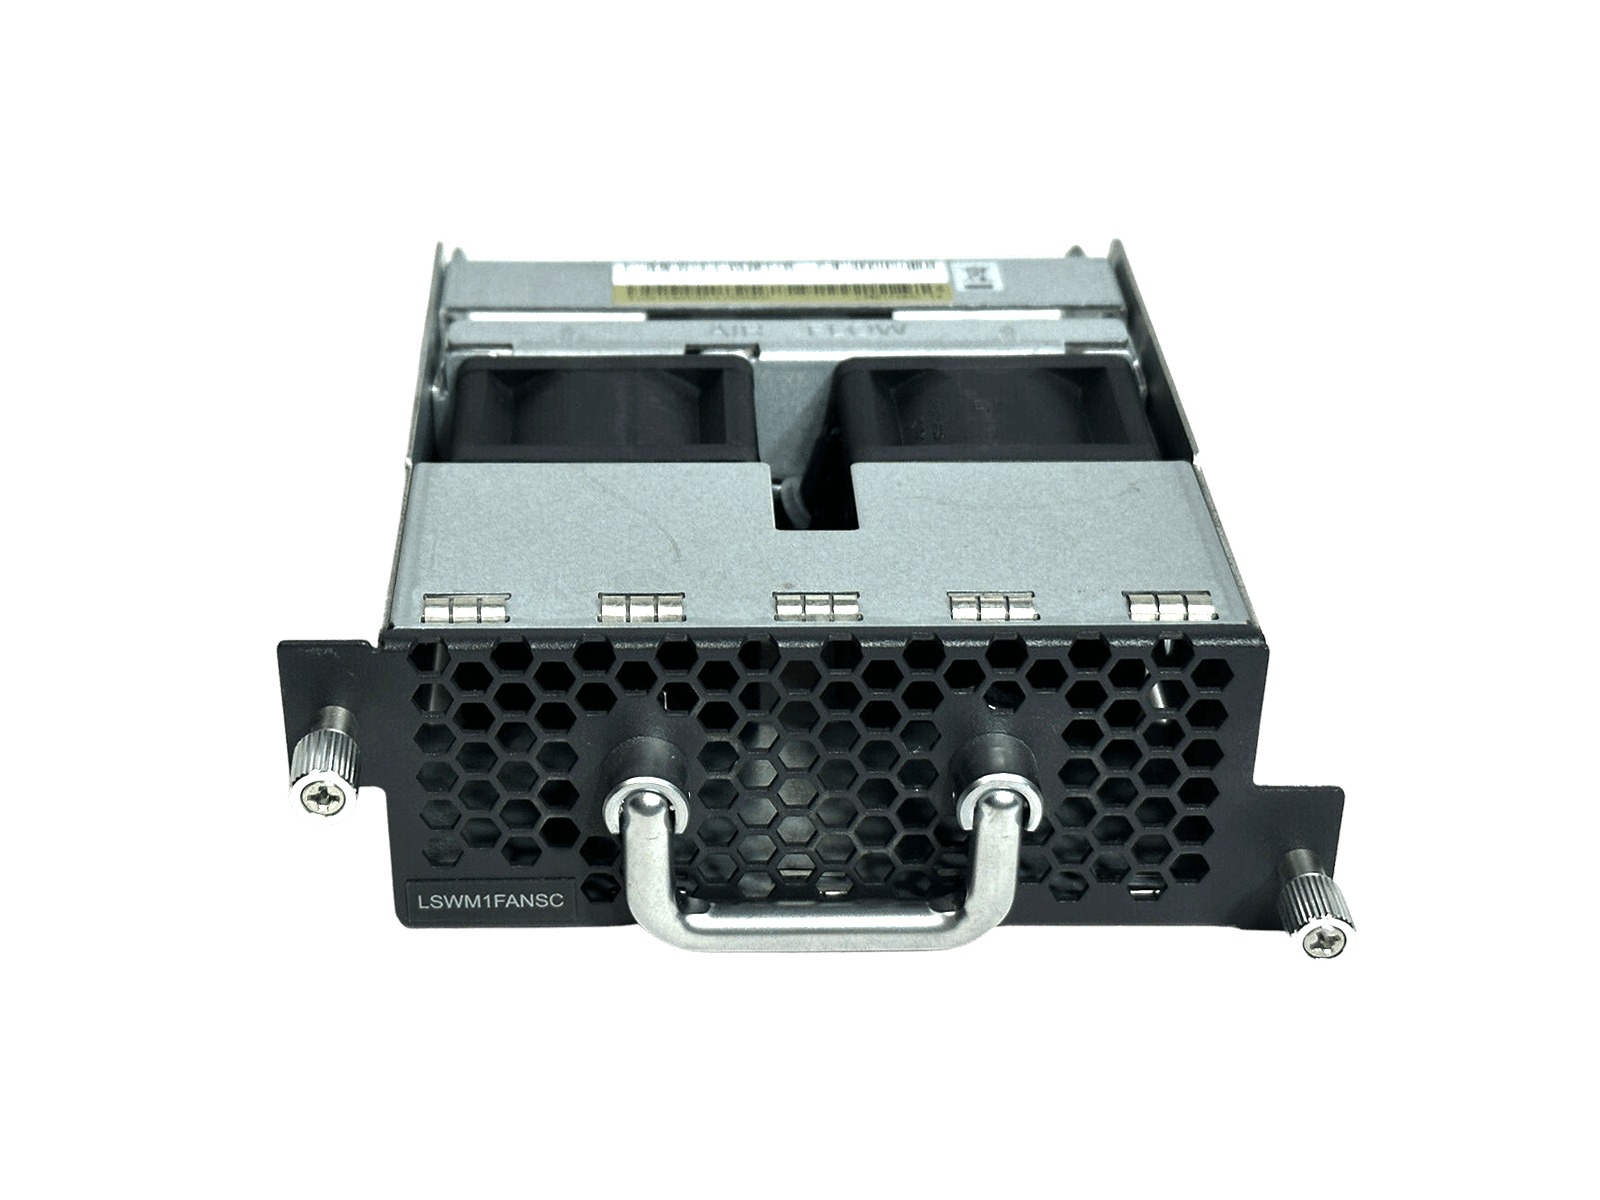 HPE JC682A 58x0AF Back (Power Side) to Front (Port Side) Airflow Fan Tray.